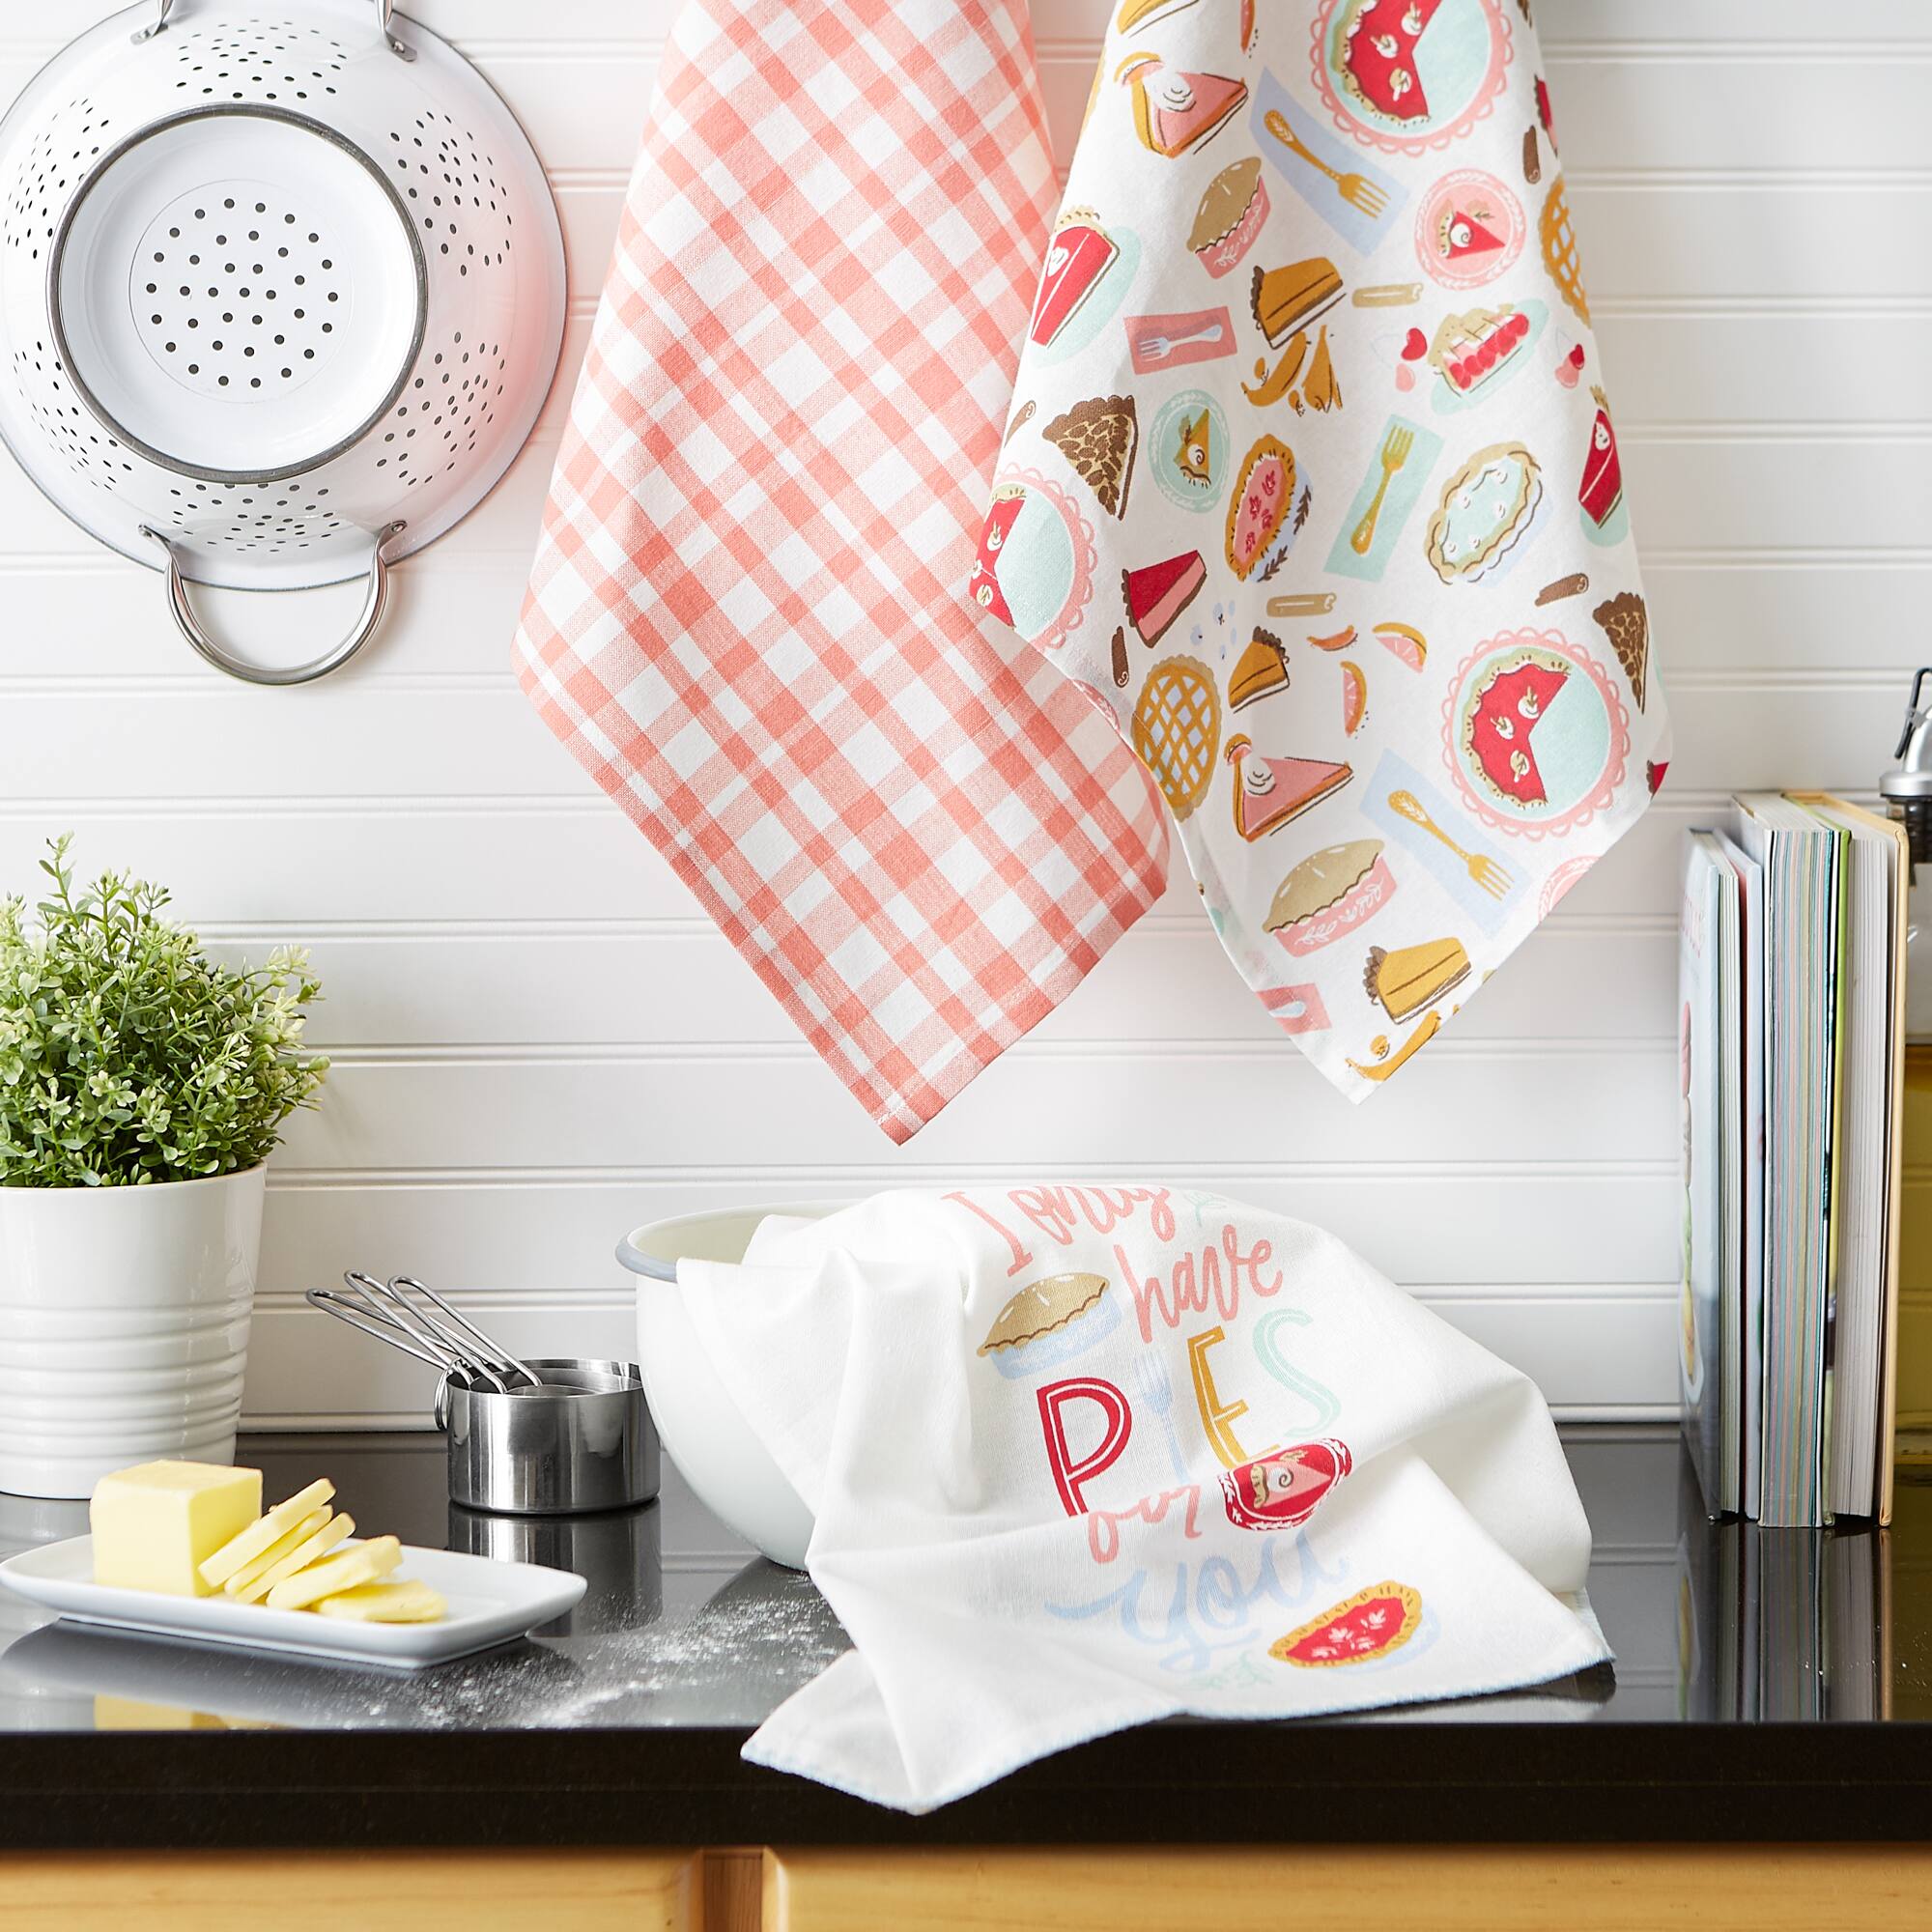 Pies For You Dishtowel (Set of 3)